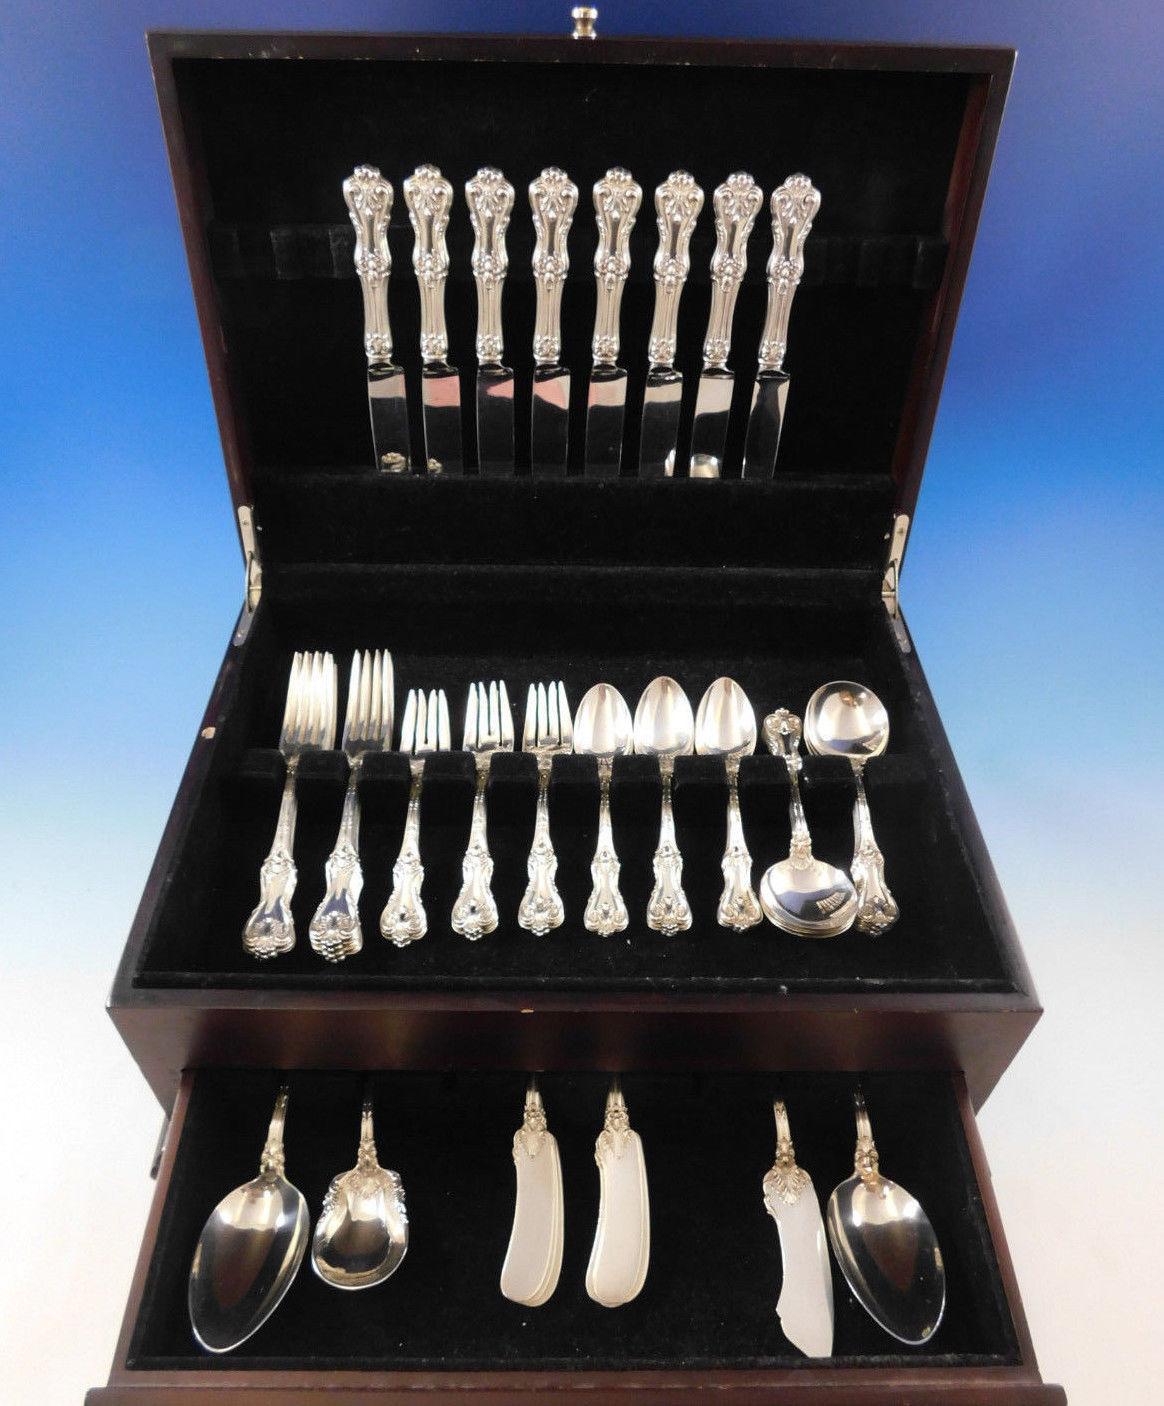 Federal Cotillion by Frank Smith sterling silver shell motif flatware set - 53 pieces. This set includes:

8 knives, 8 1/2